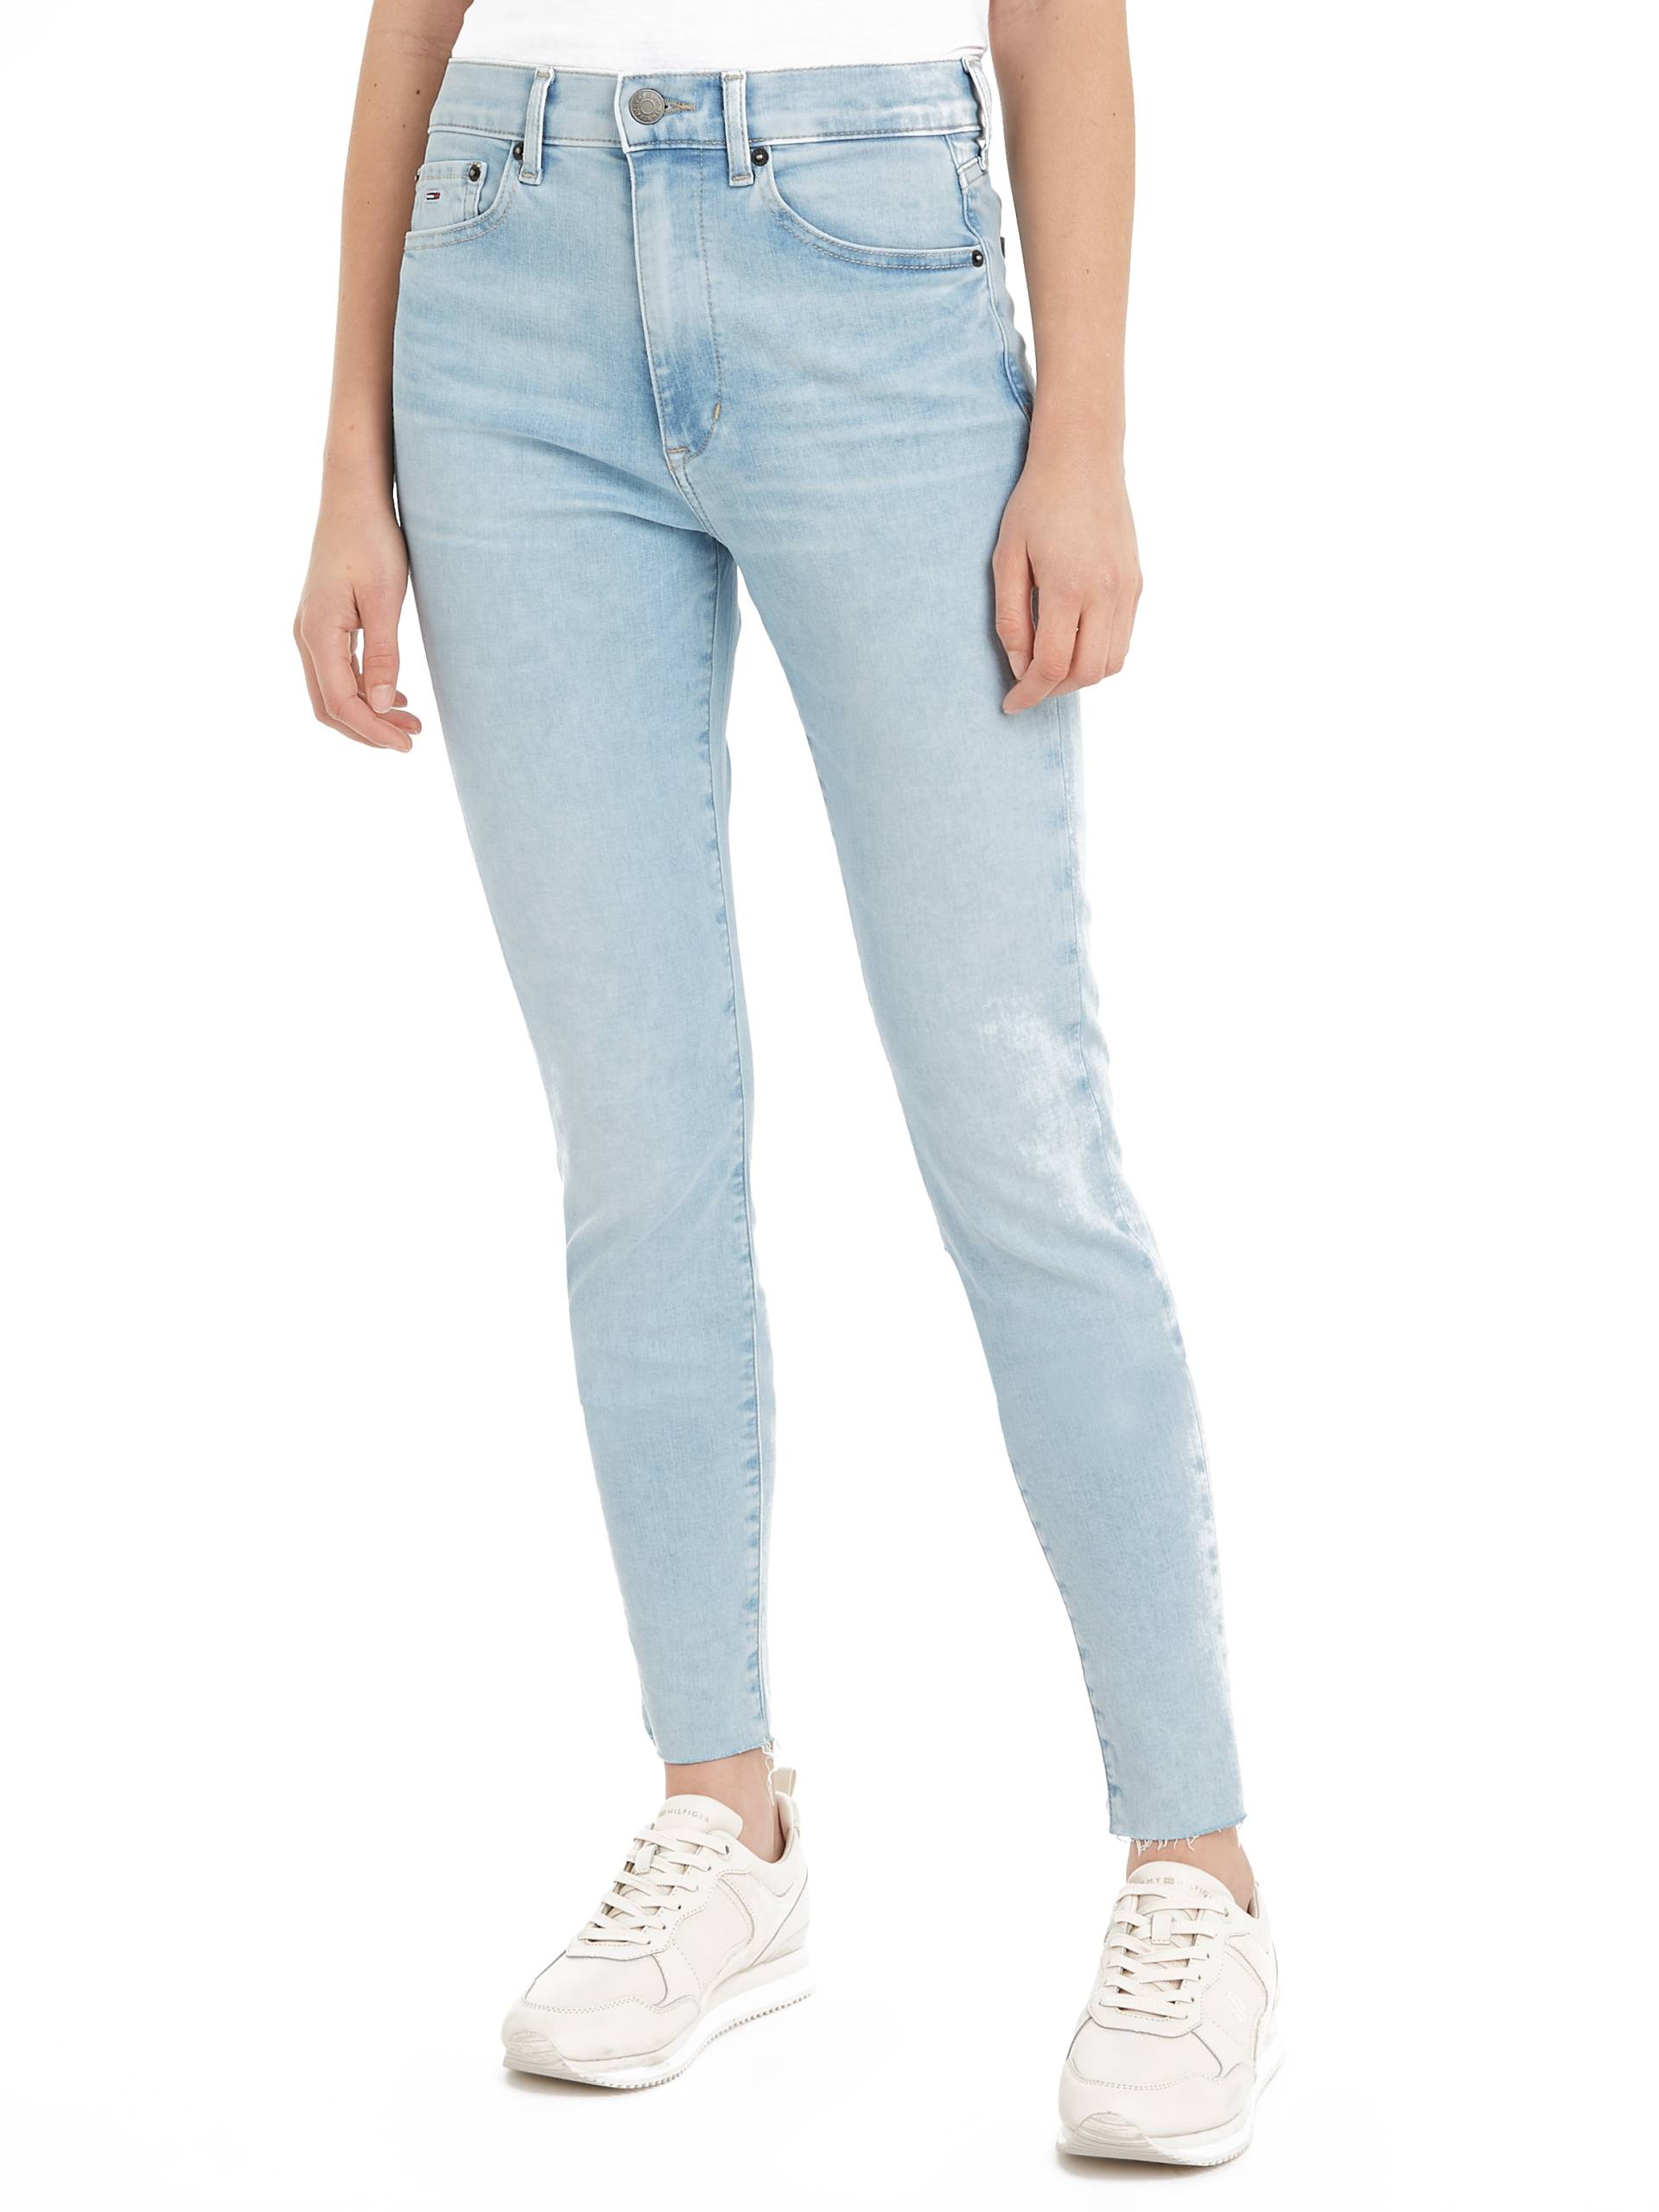 Tommy Jeans Bequeme Jeans »Sylvia Skinny Slim Jeans Hohe Leibhöhe« von TOMMY JEANS